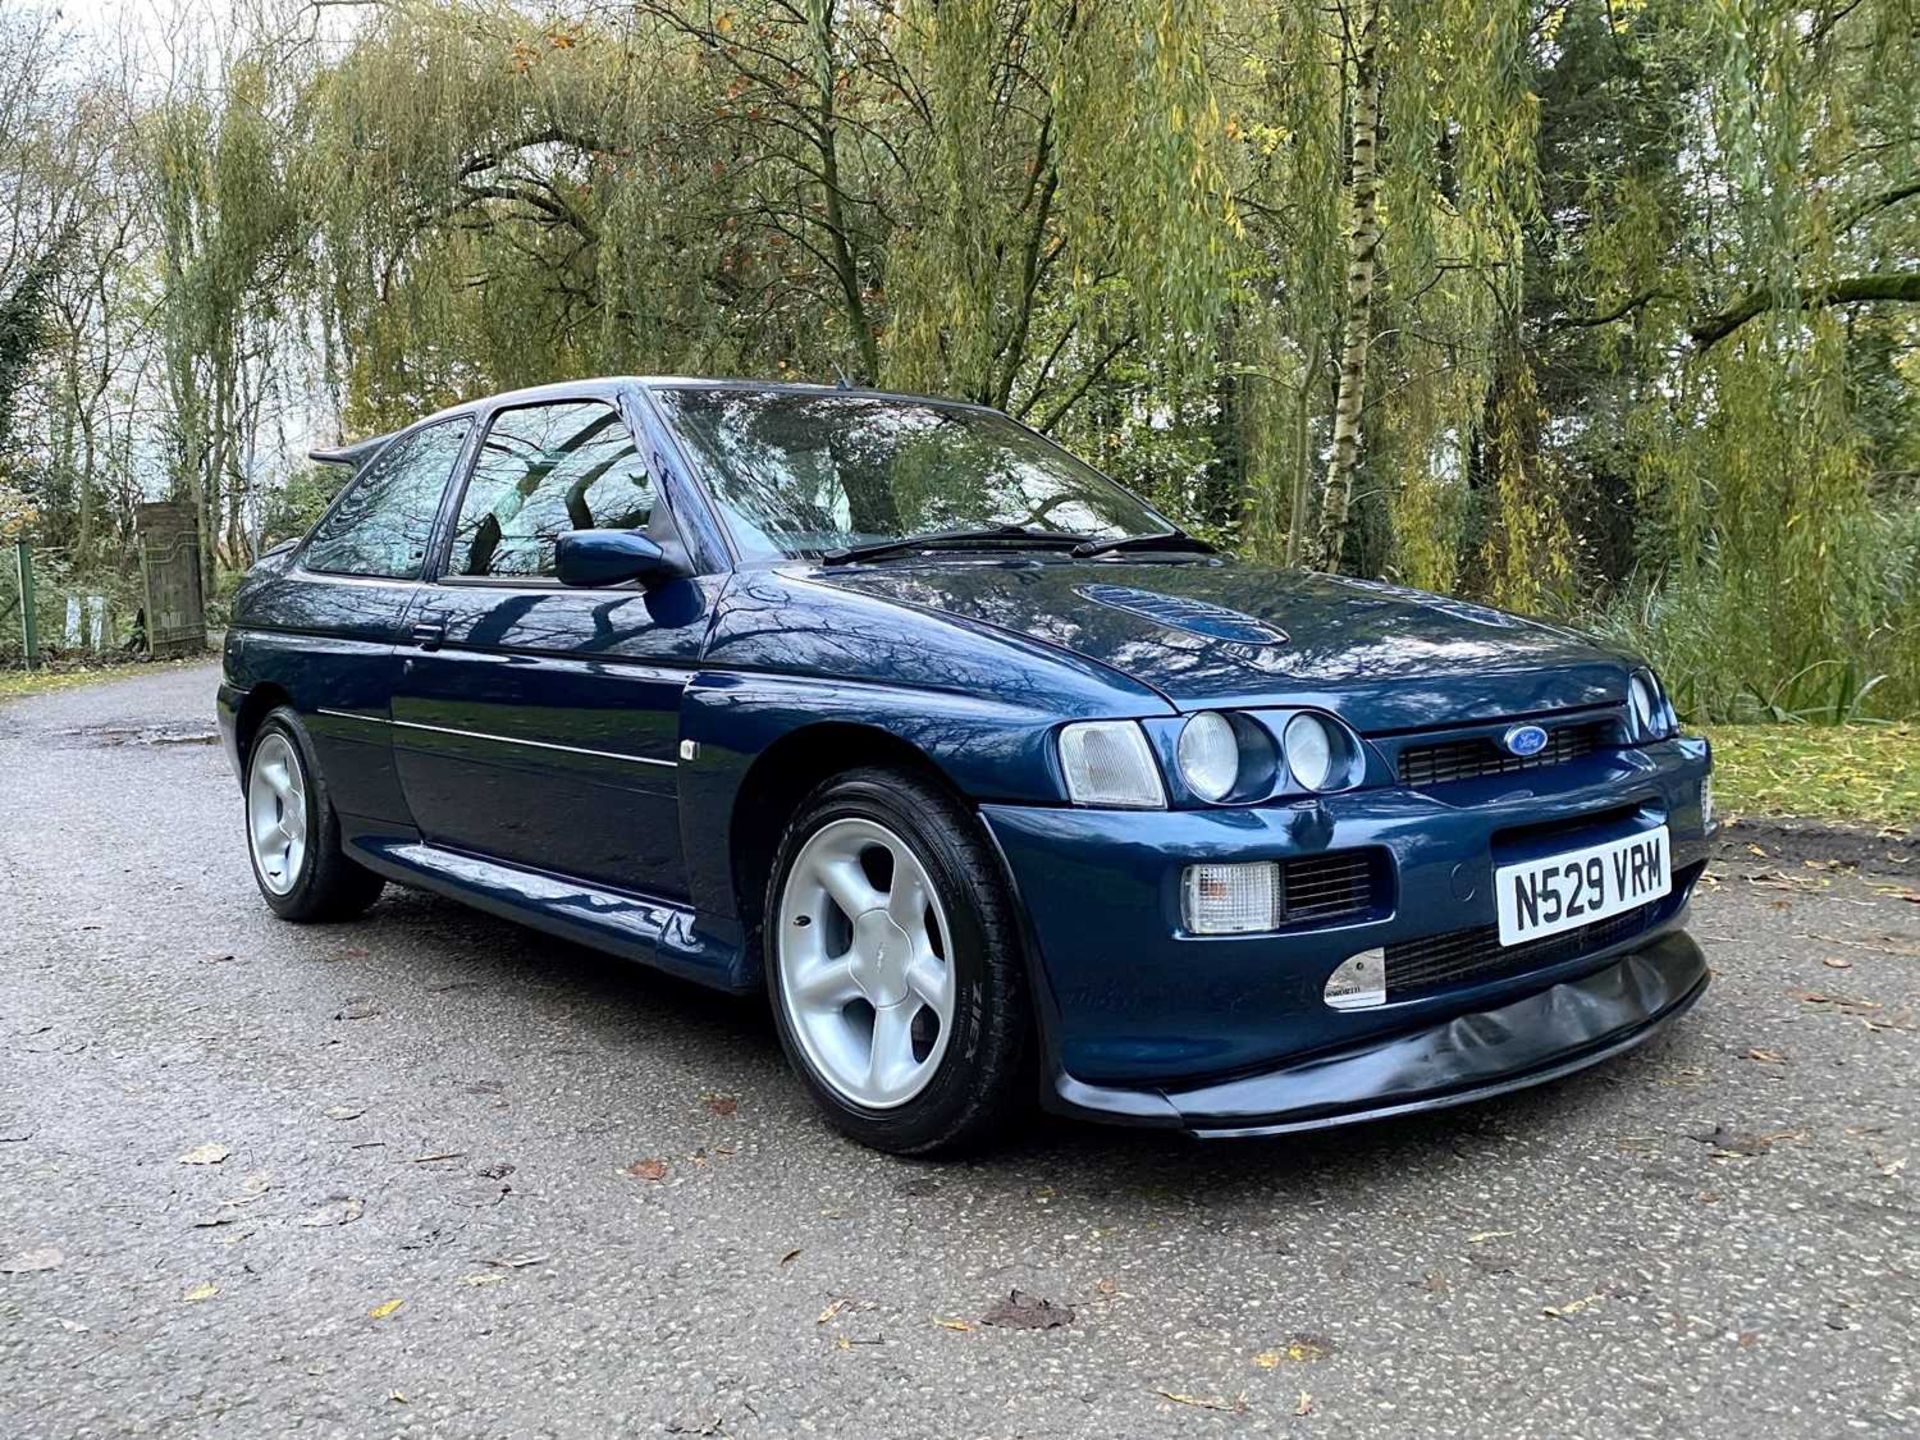 1995 Ford Escort RS Cosworth LUX Only 56,000 miles, finished in rare Petrol Blue - Image 7 of 98